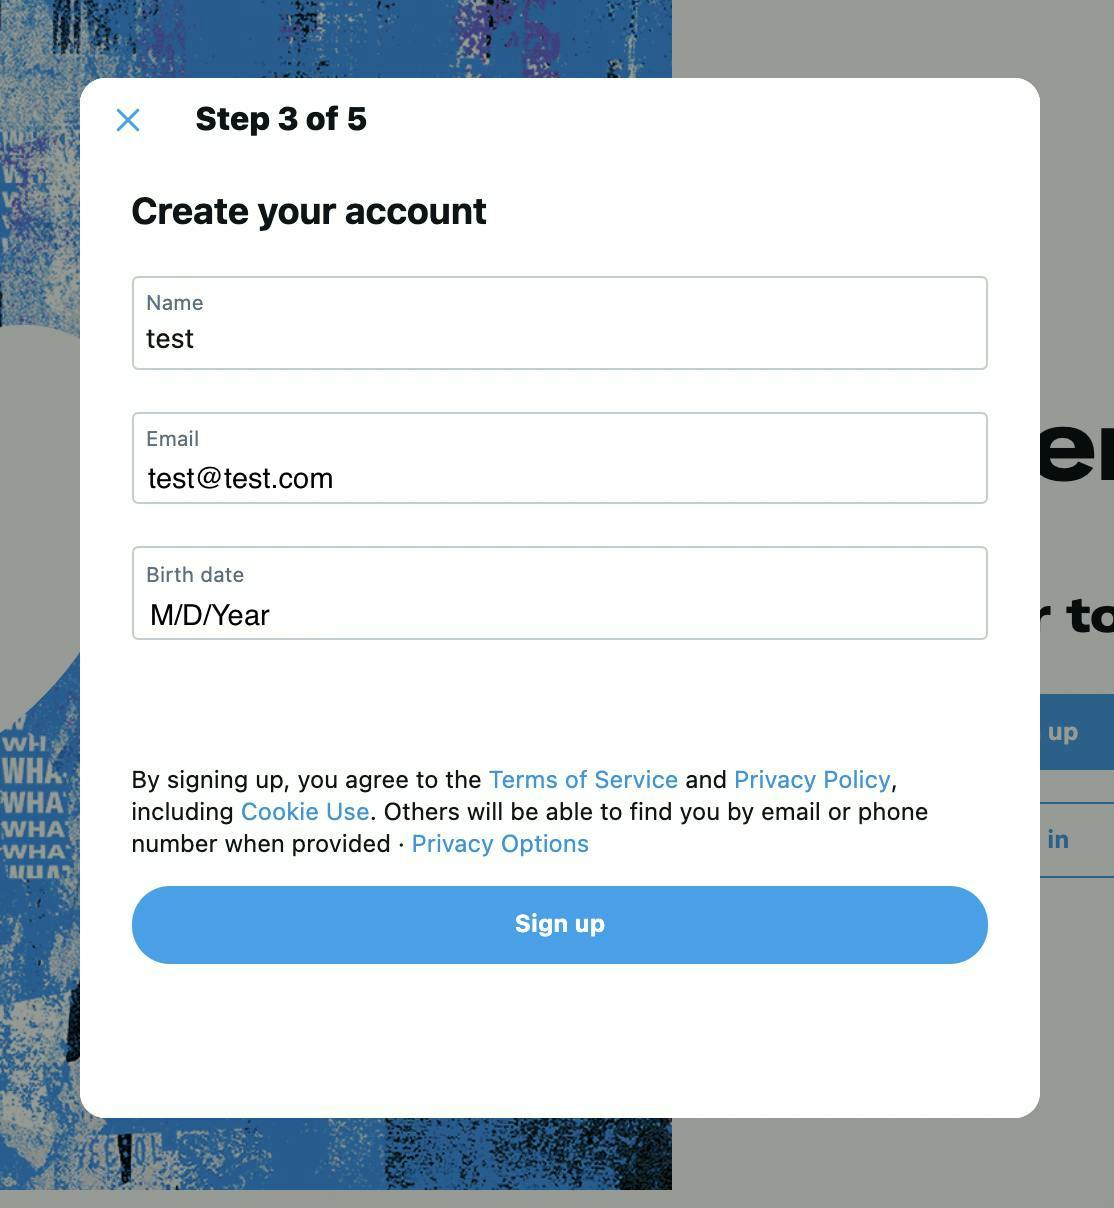 Step 4 in setting up a Twitter account showing fields for name, email, and birthday